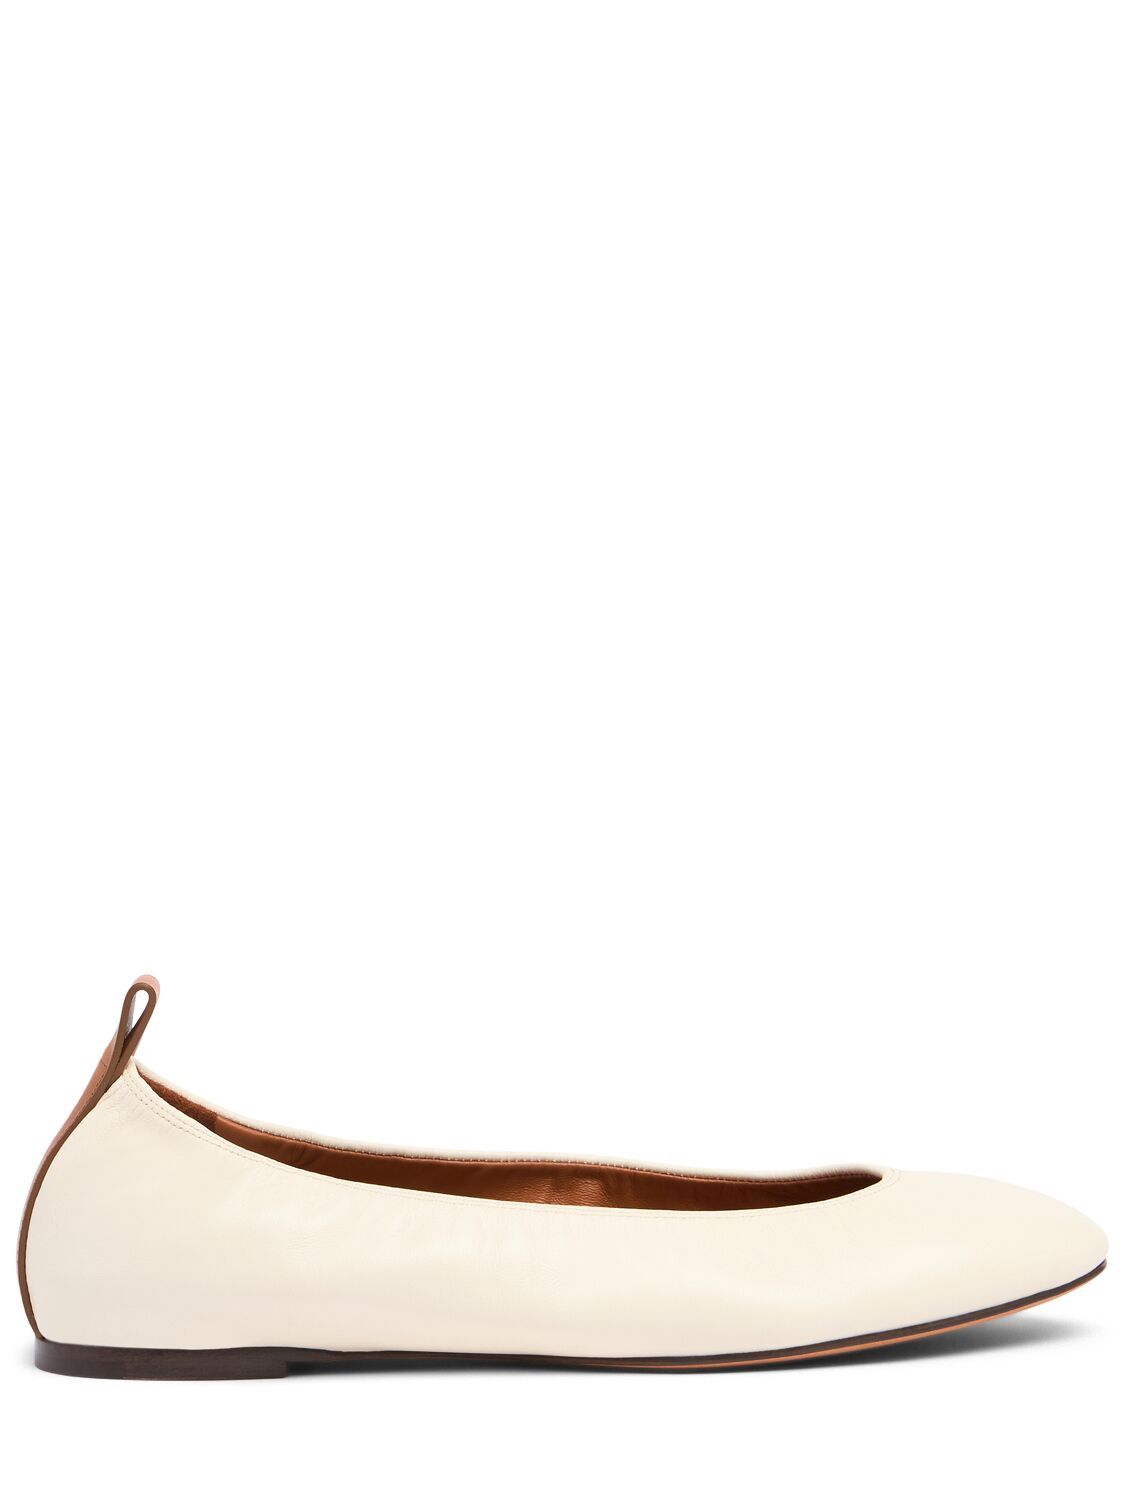 Image of 5mm Leather Ballerina Flats